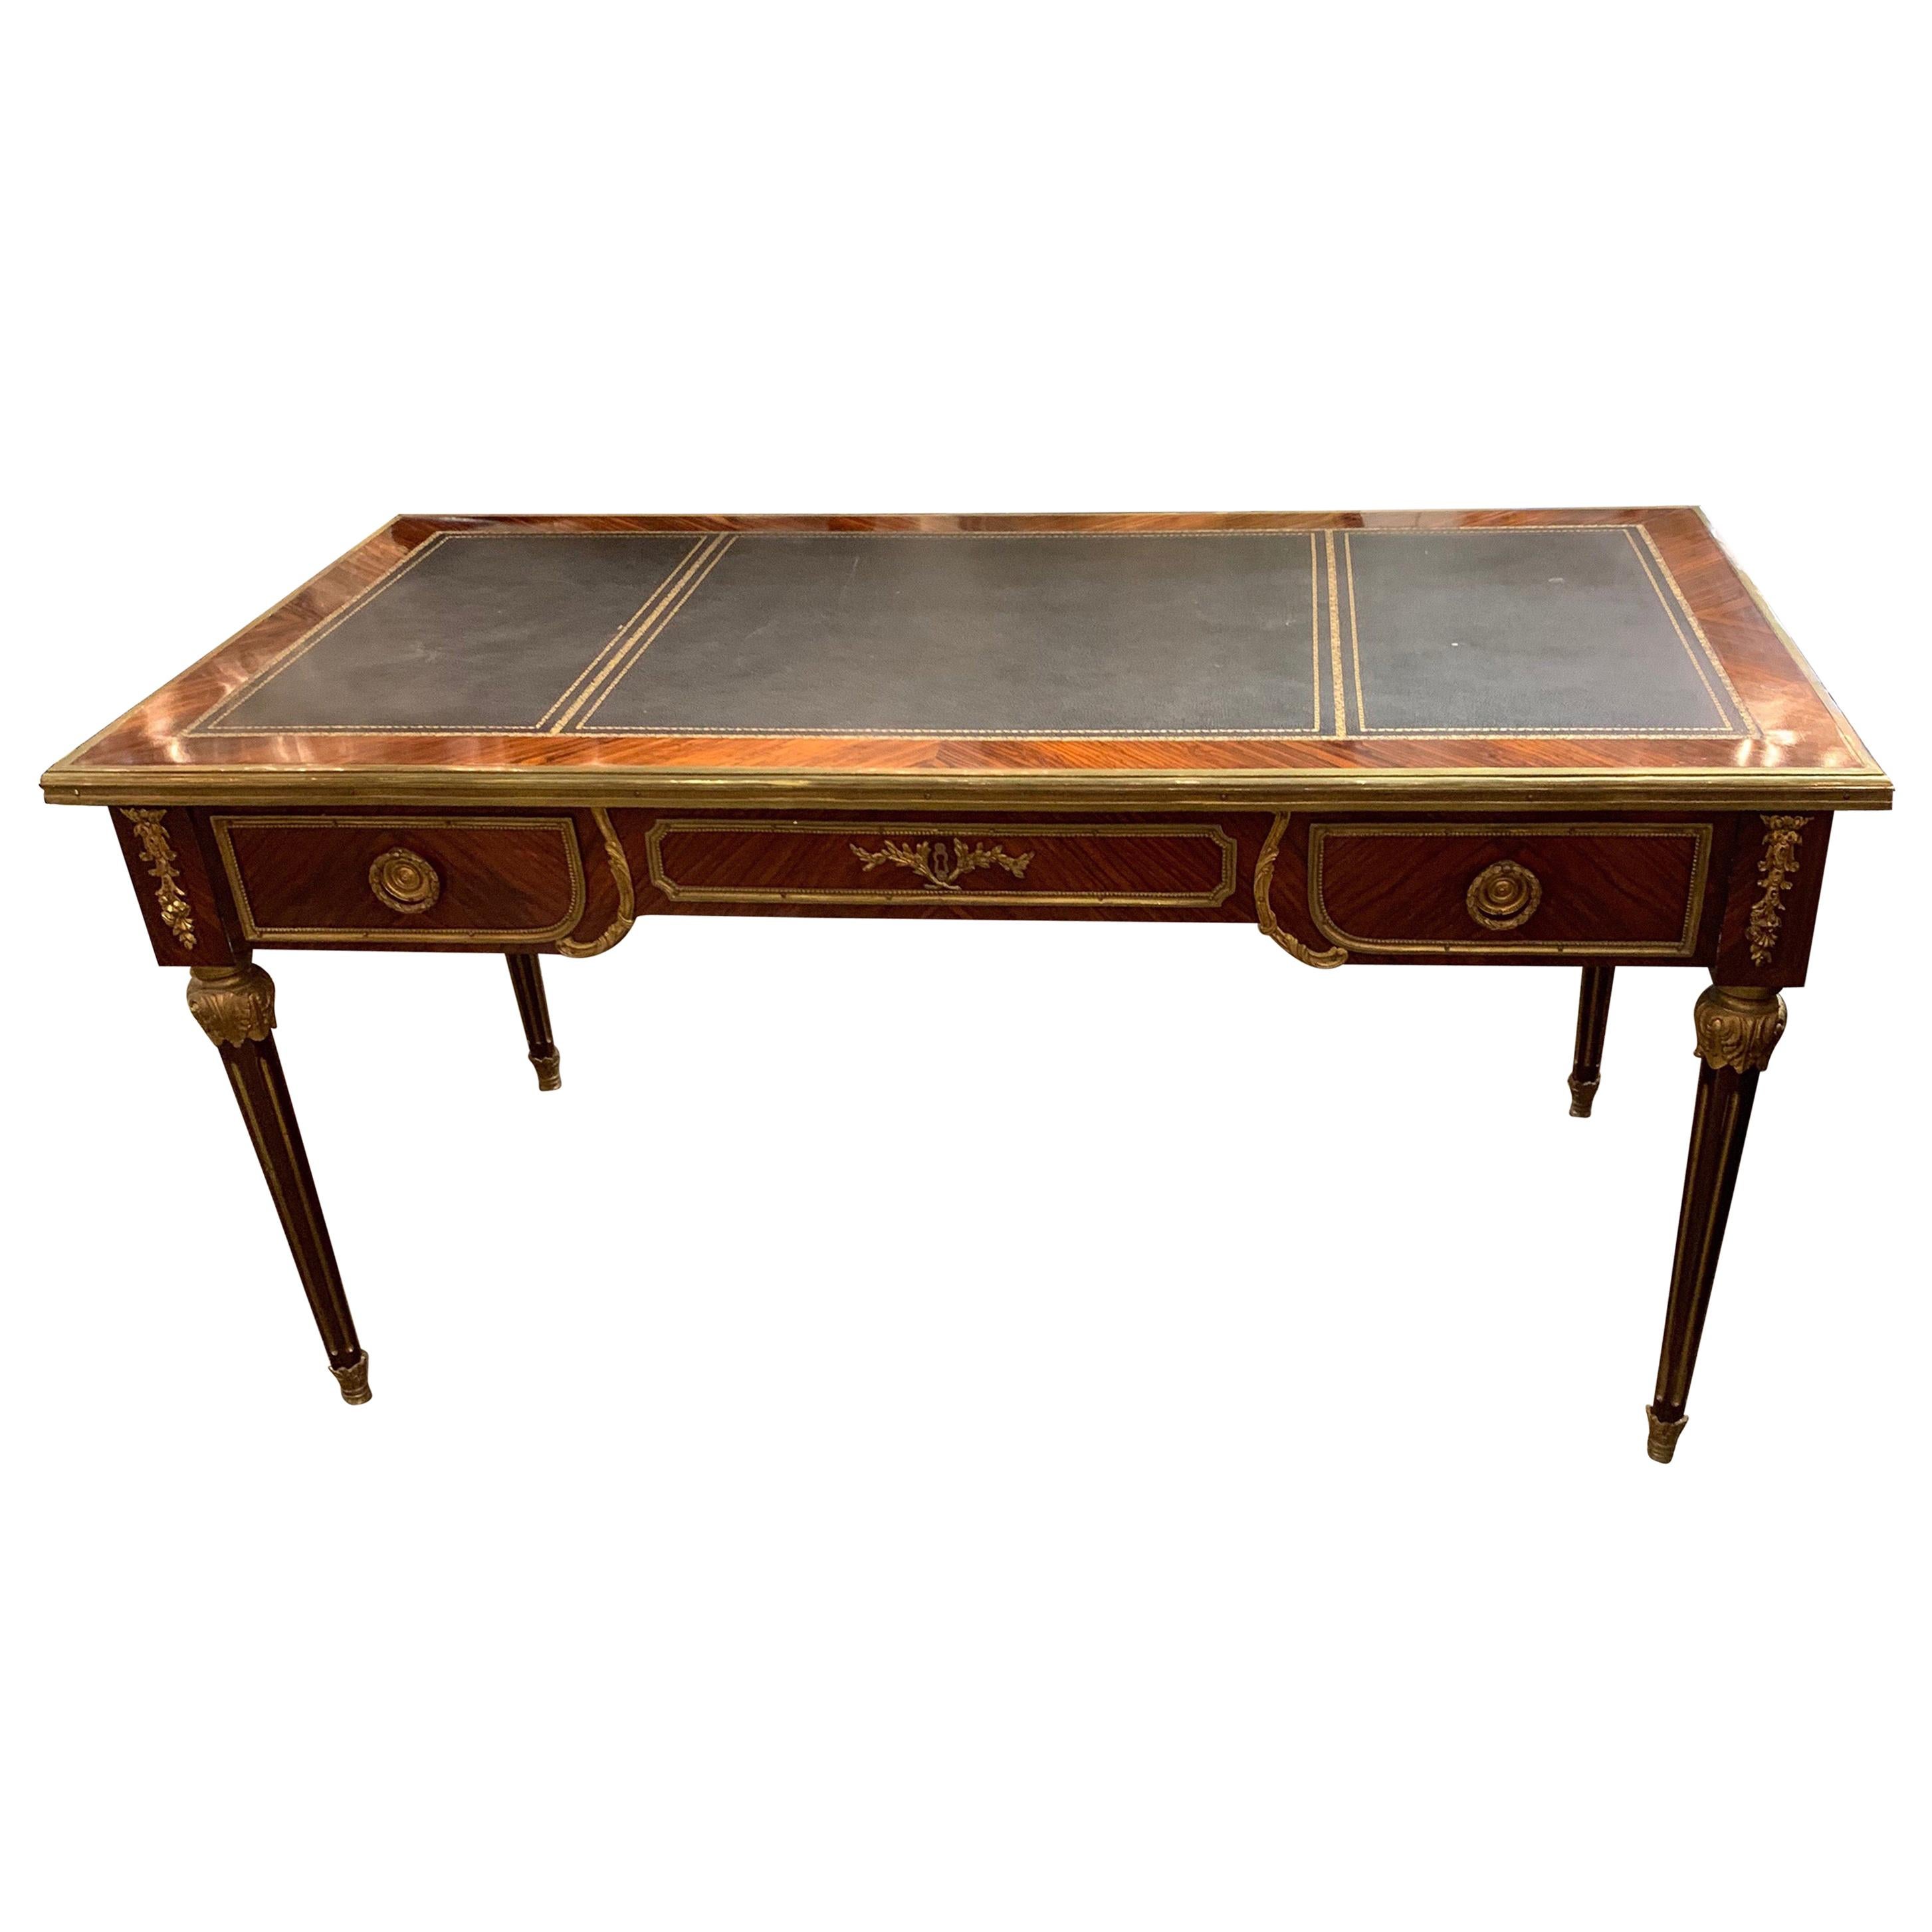 French Empire Style Rosewood and Gilt Bronze Mounted Desk